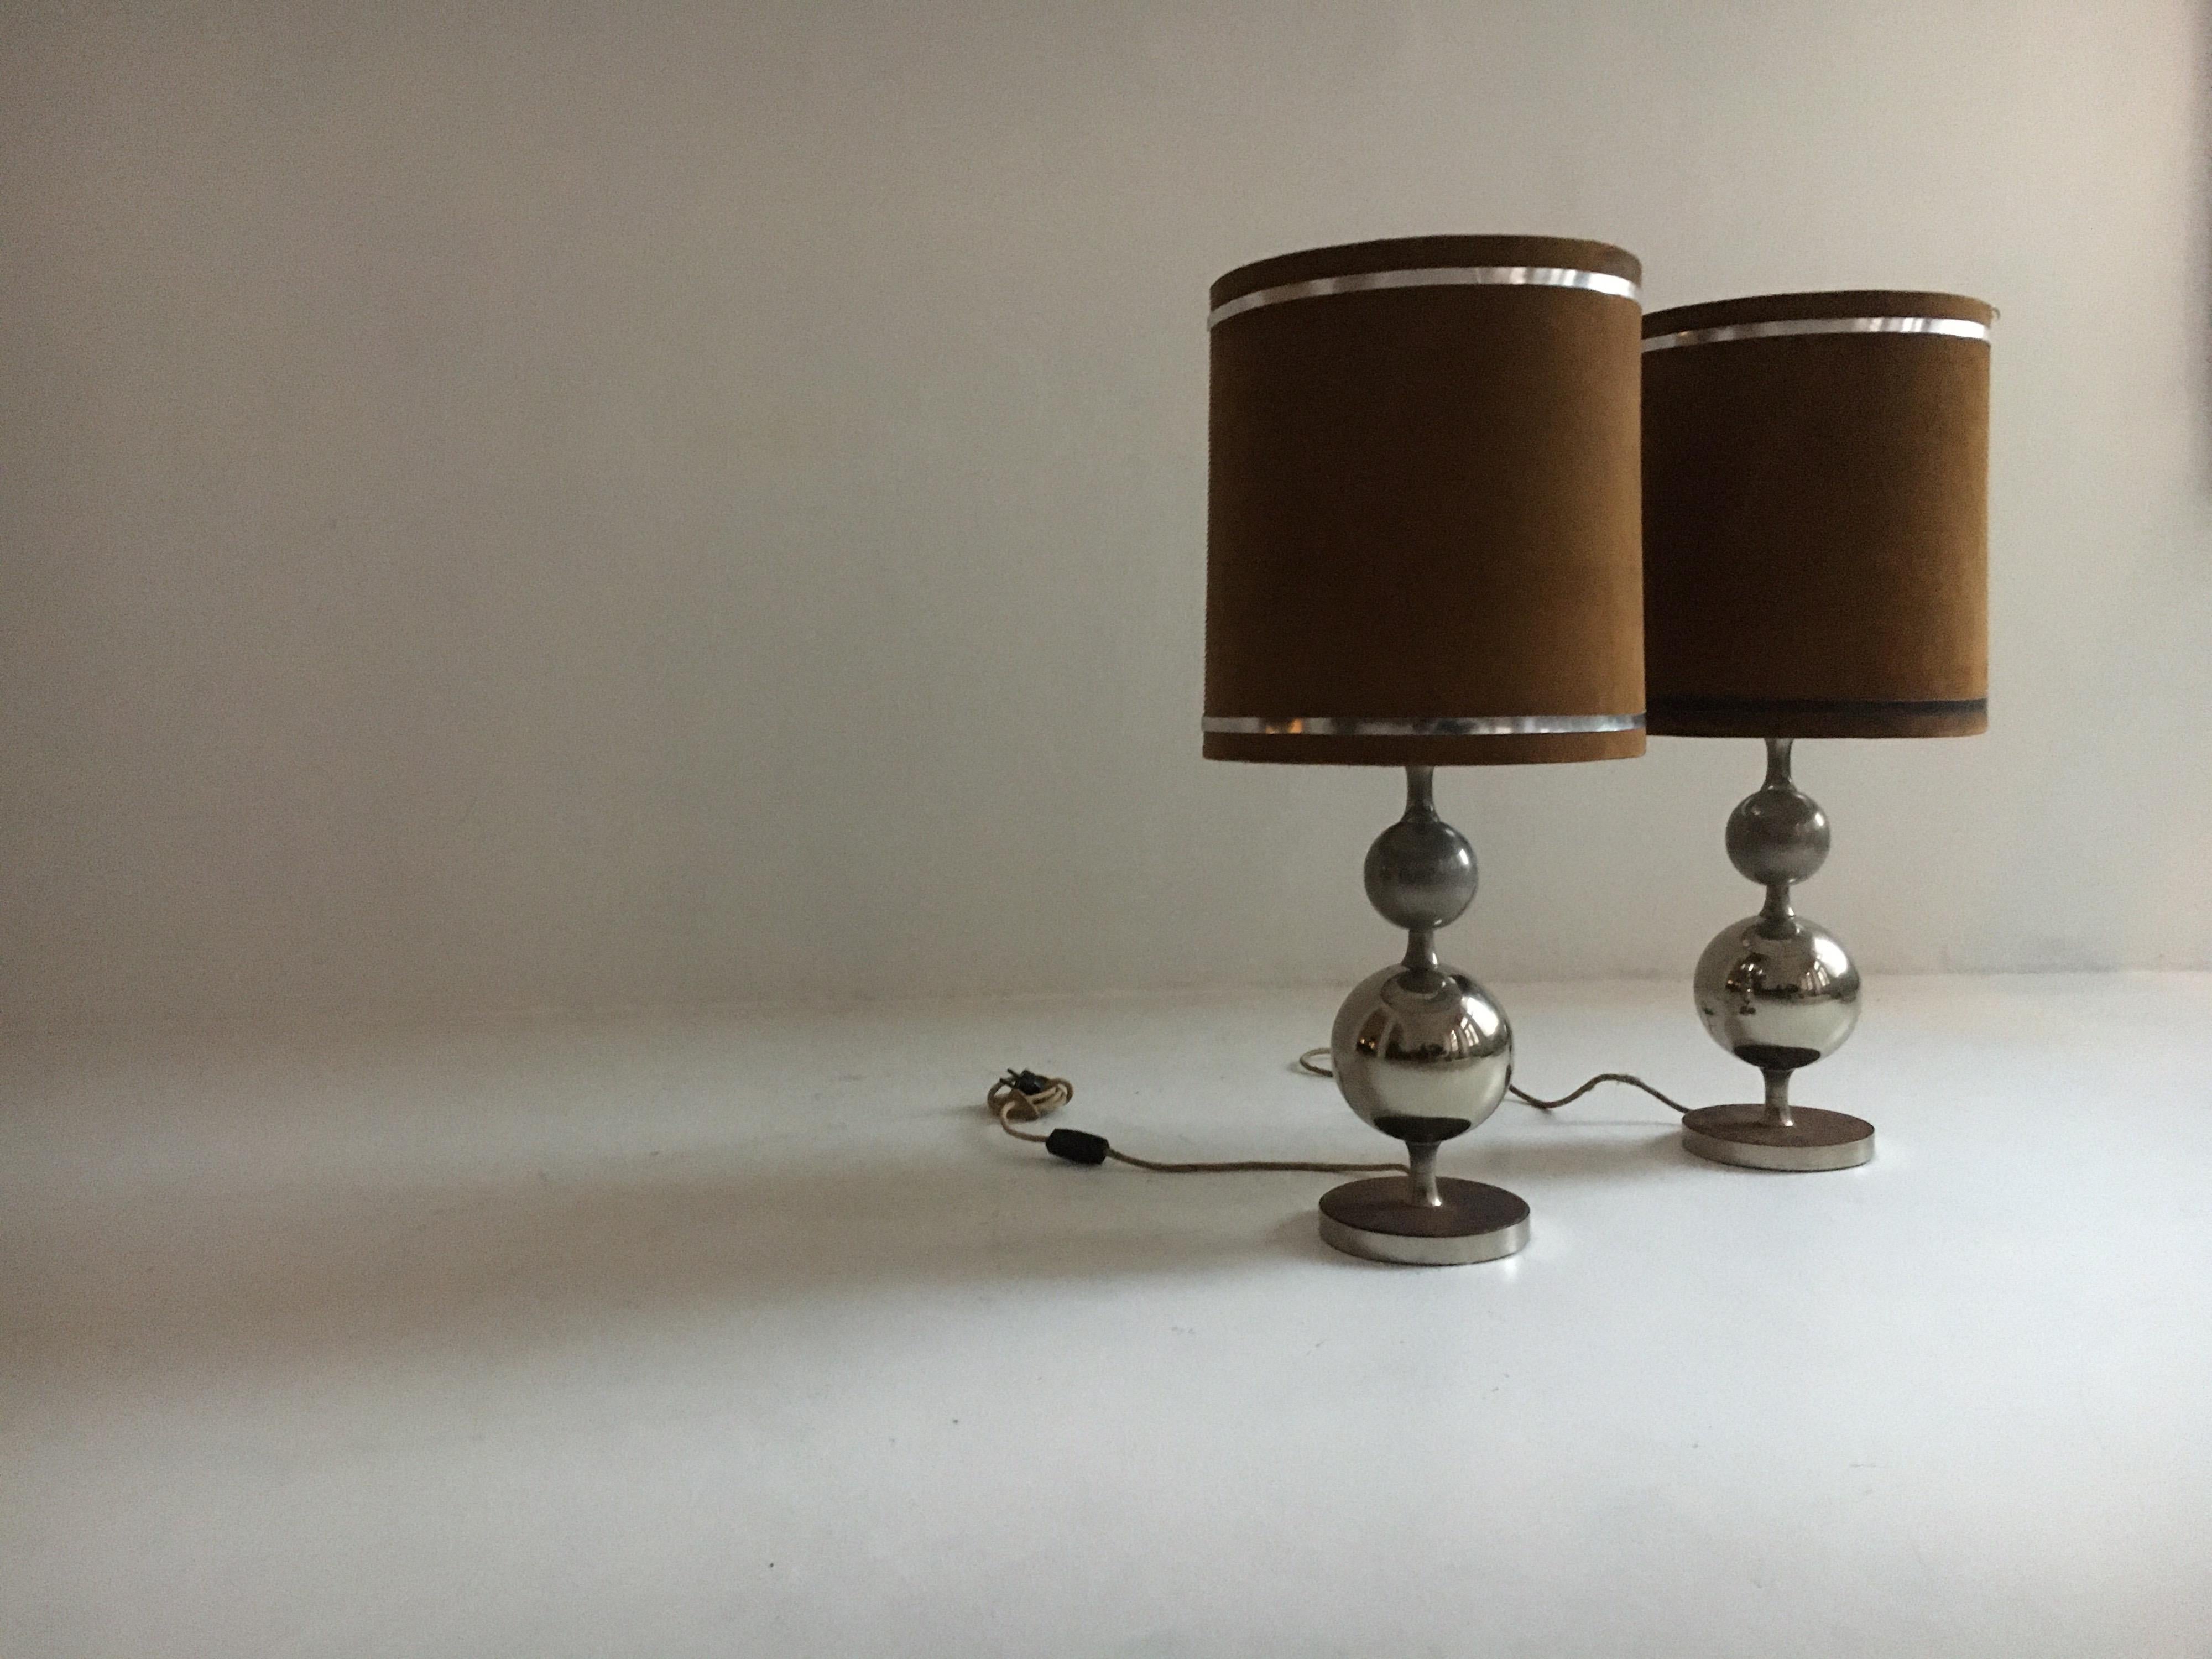 Brass Pierre Cardin Oversized Chrome and Suede Table Lamps, France, 1970s For Sale